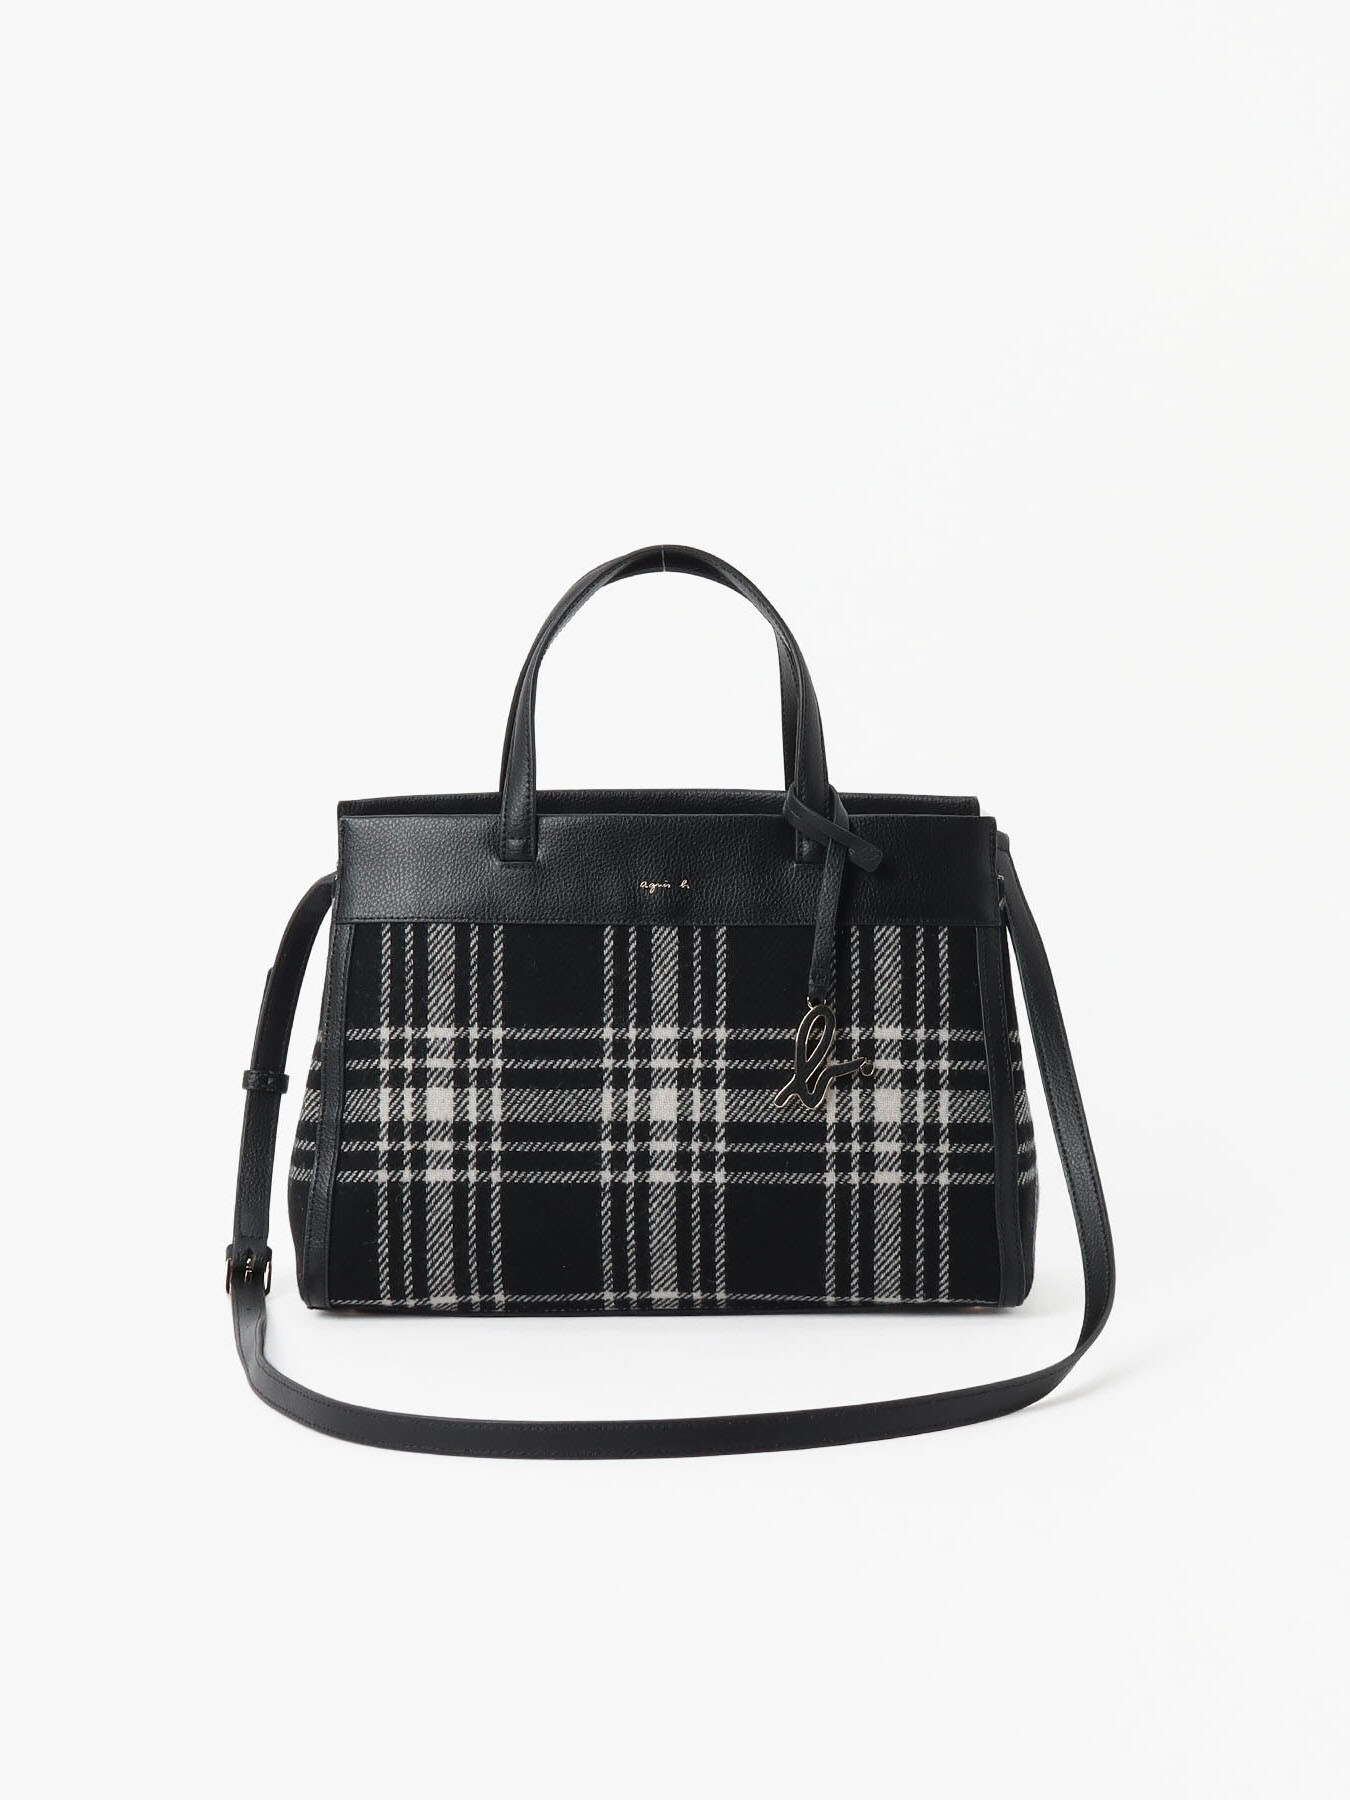 Kate Spade Pink Plaid Purse - $55 (82% Off Retail) - From Brianne